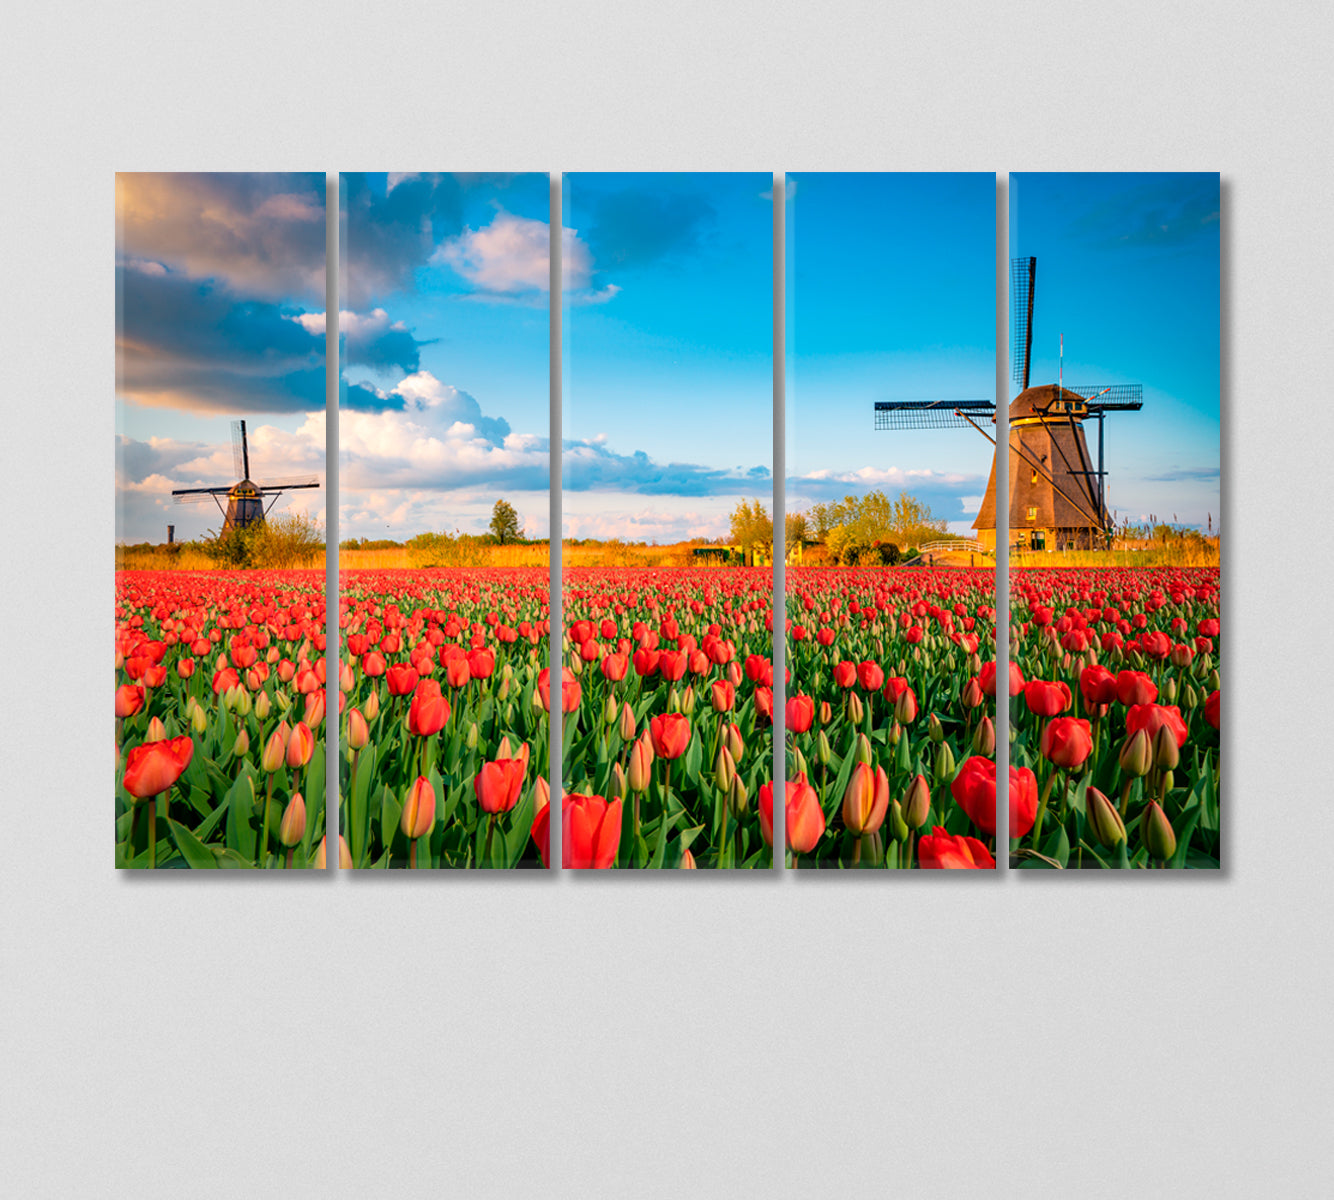 Tulip Field and Two Windmills Holland Canvas Print-Canvas Print-CetArt-5 Panels-36x24 inches-CetArt